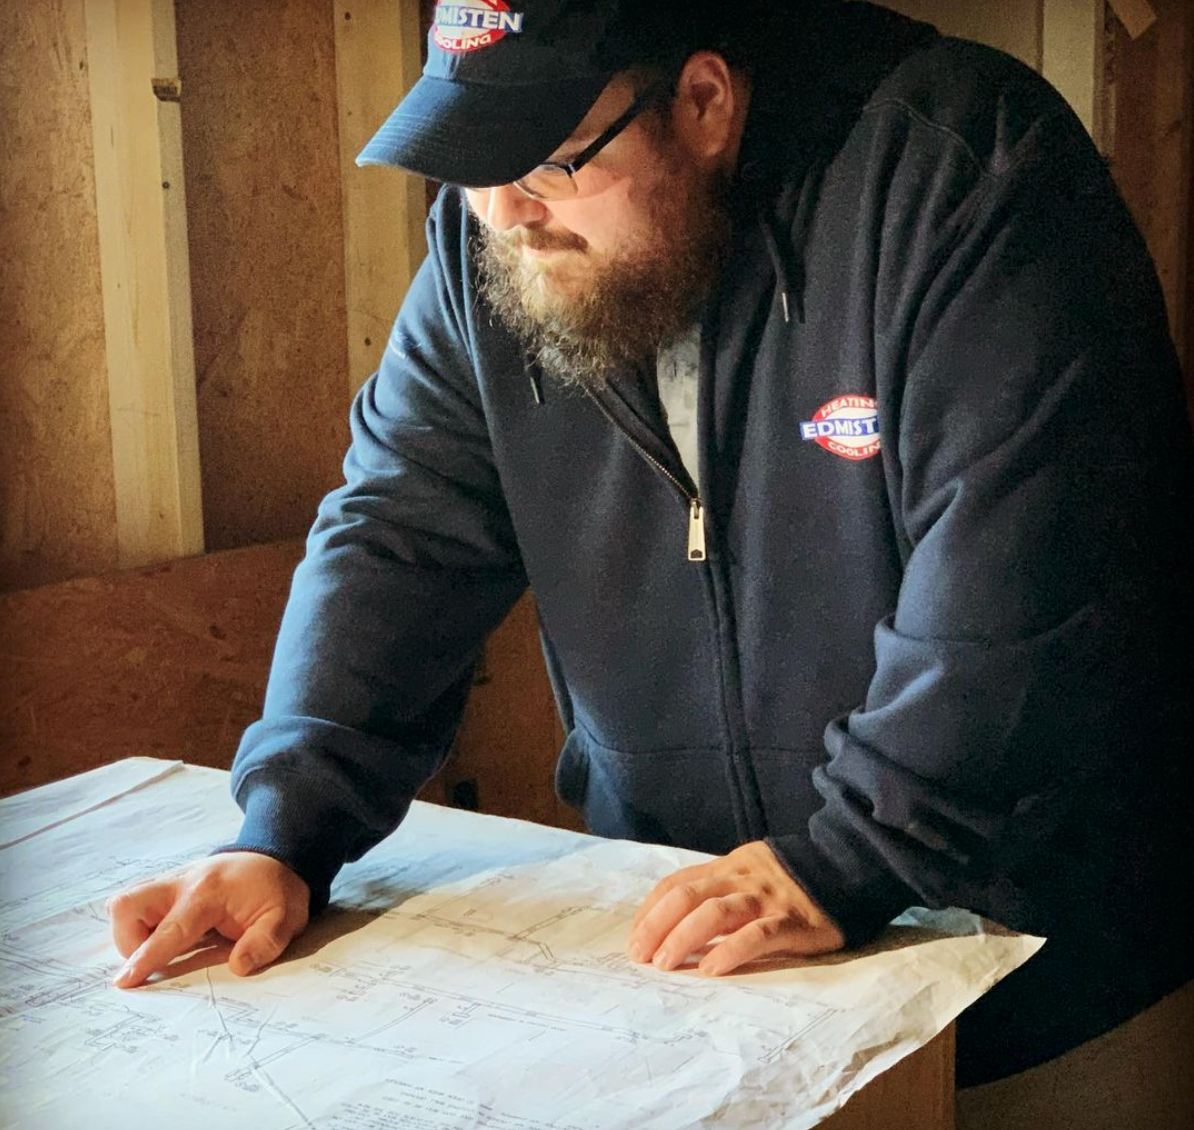 A man with a beard wearing a dickies hat is looking at a map